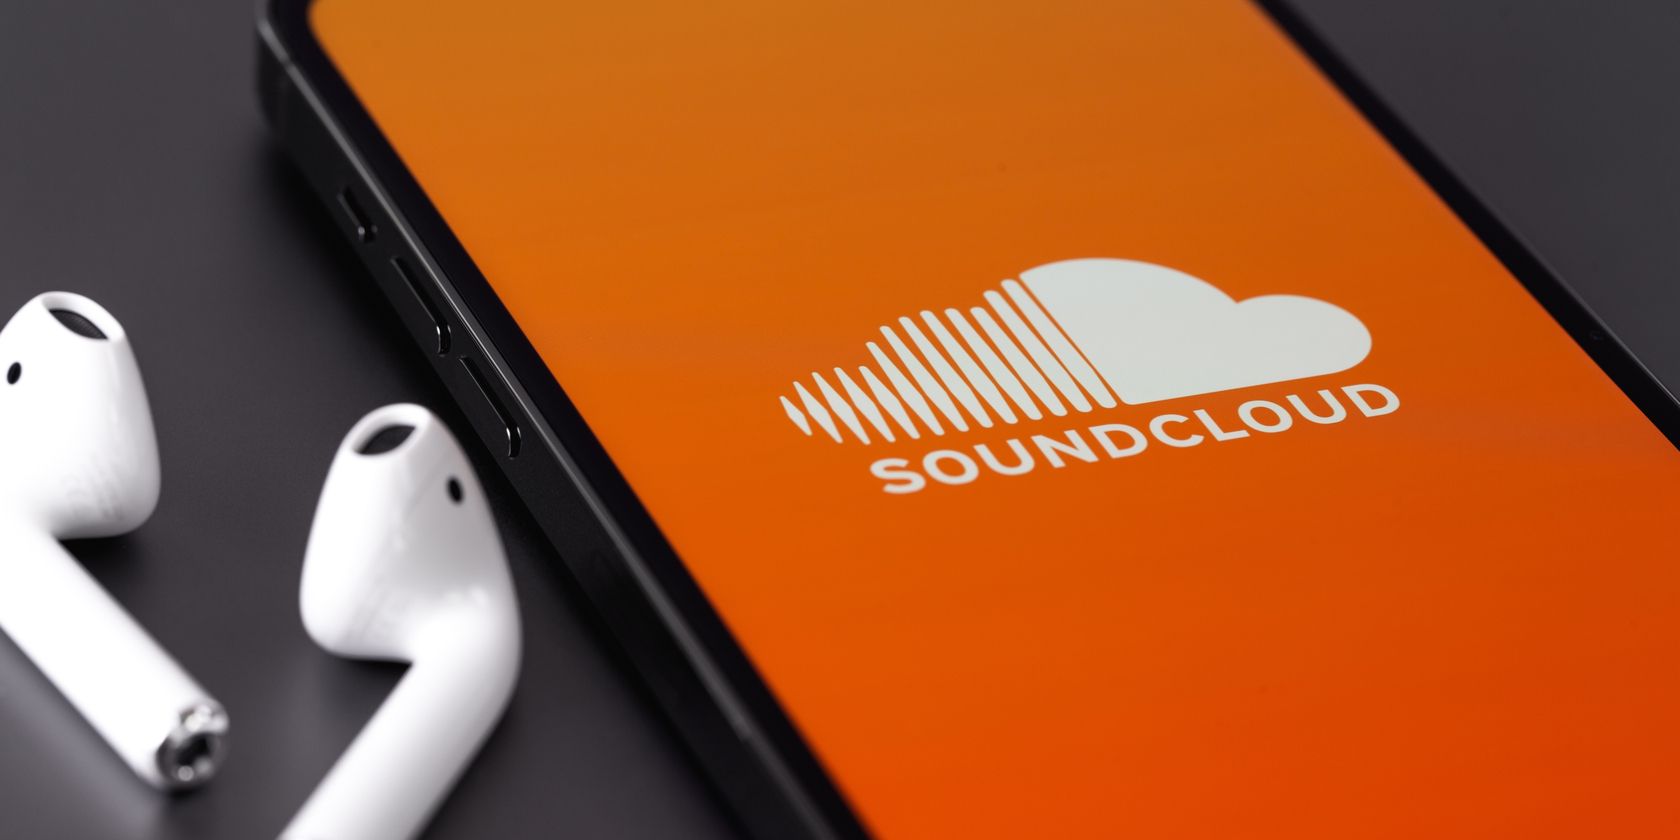 soundcloud-logo-on-phone-next-to-earbuds